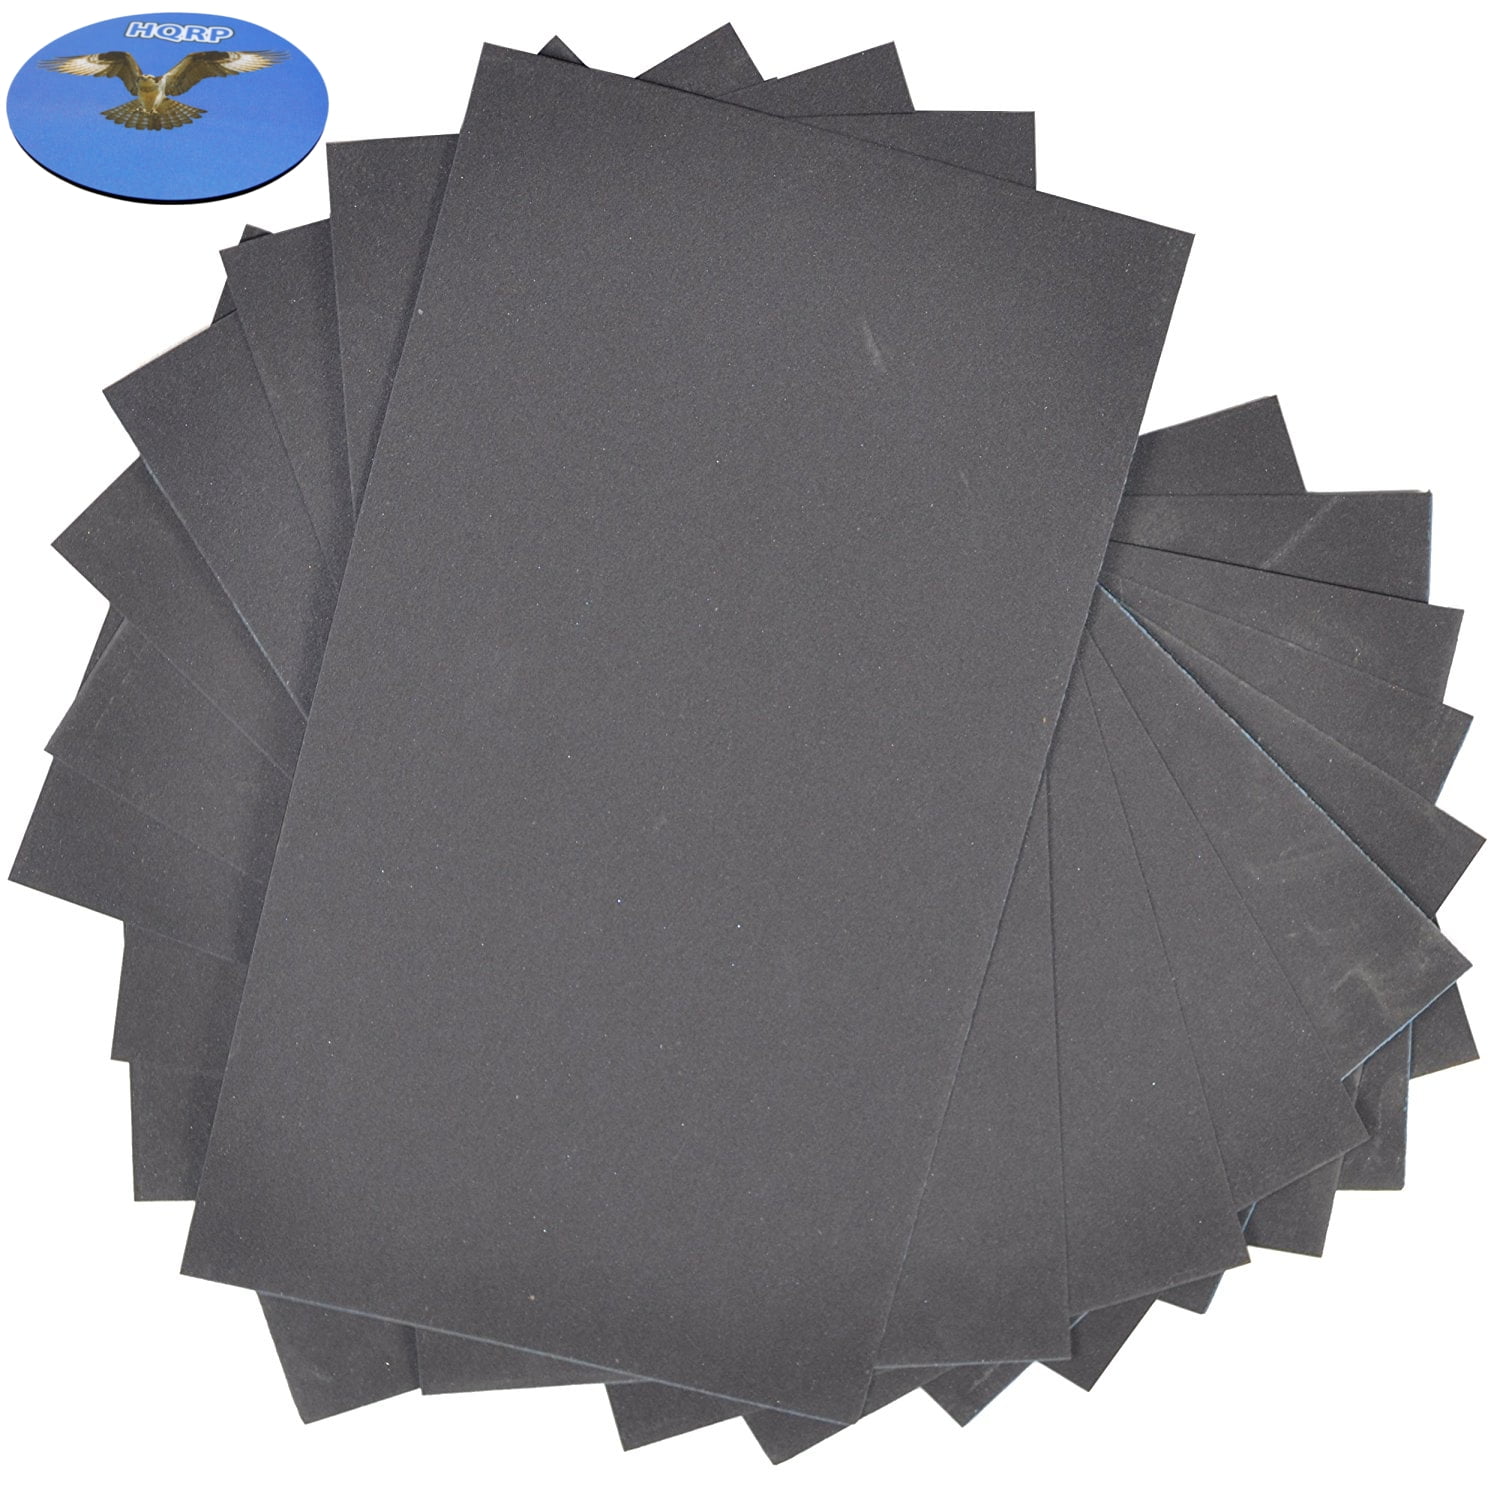 Waterproof Silicone Carbide 10-Pack HQRP 3" x 5 1/2" Wet Dry Sandpaper 400 Grit 